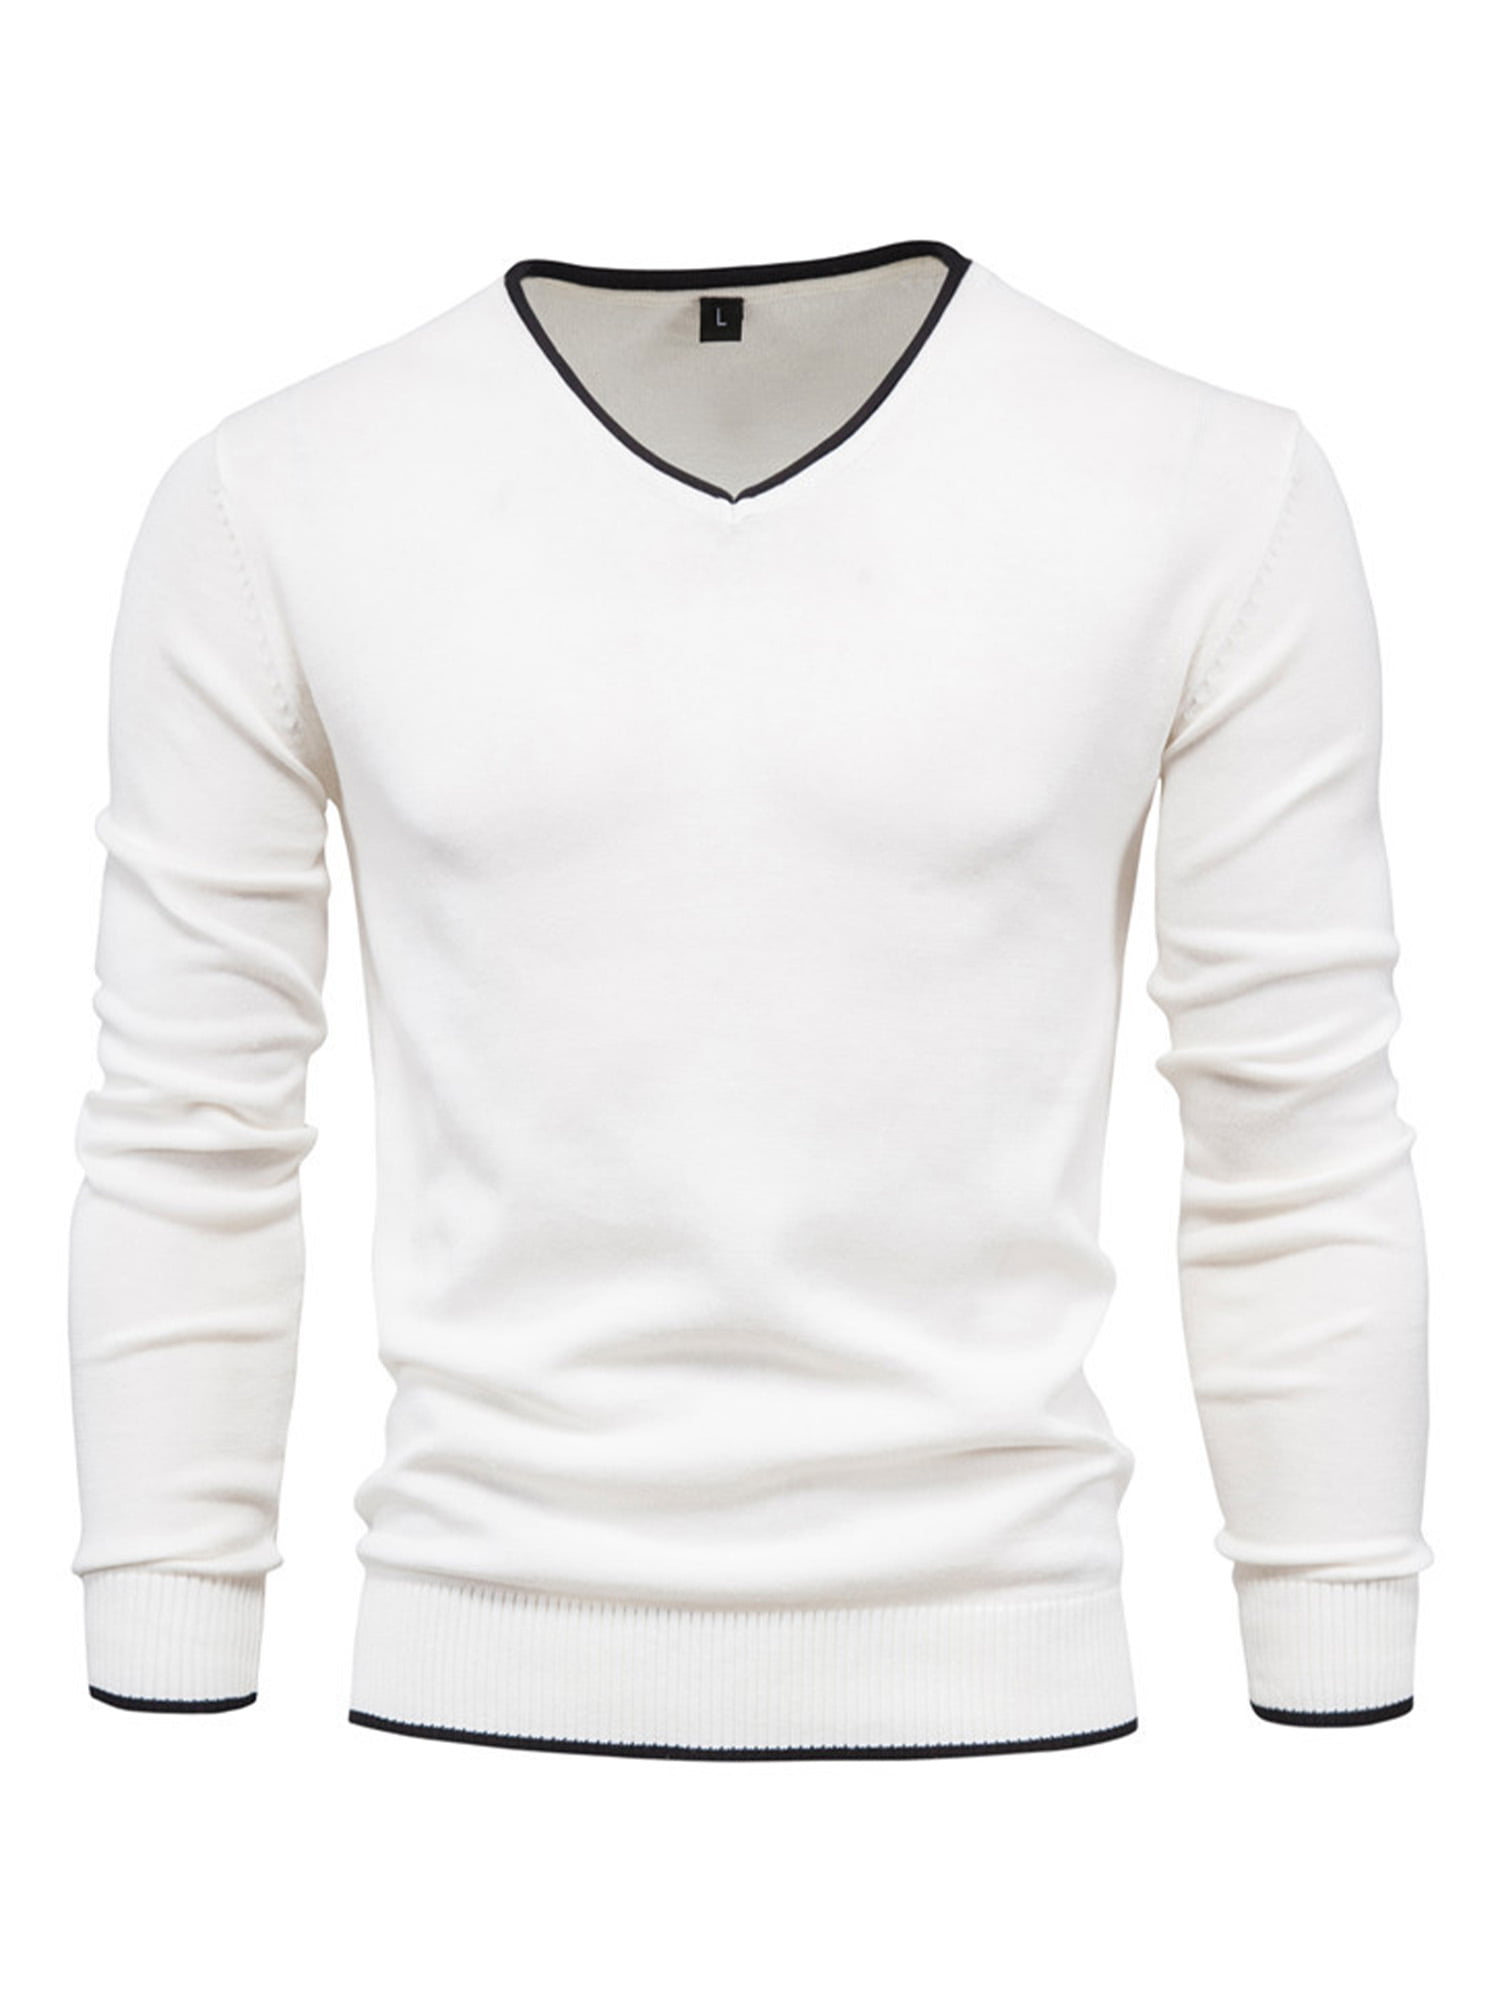 Pullover Men V Neck Sweater Mens Slim Fit Casual Sweater